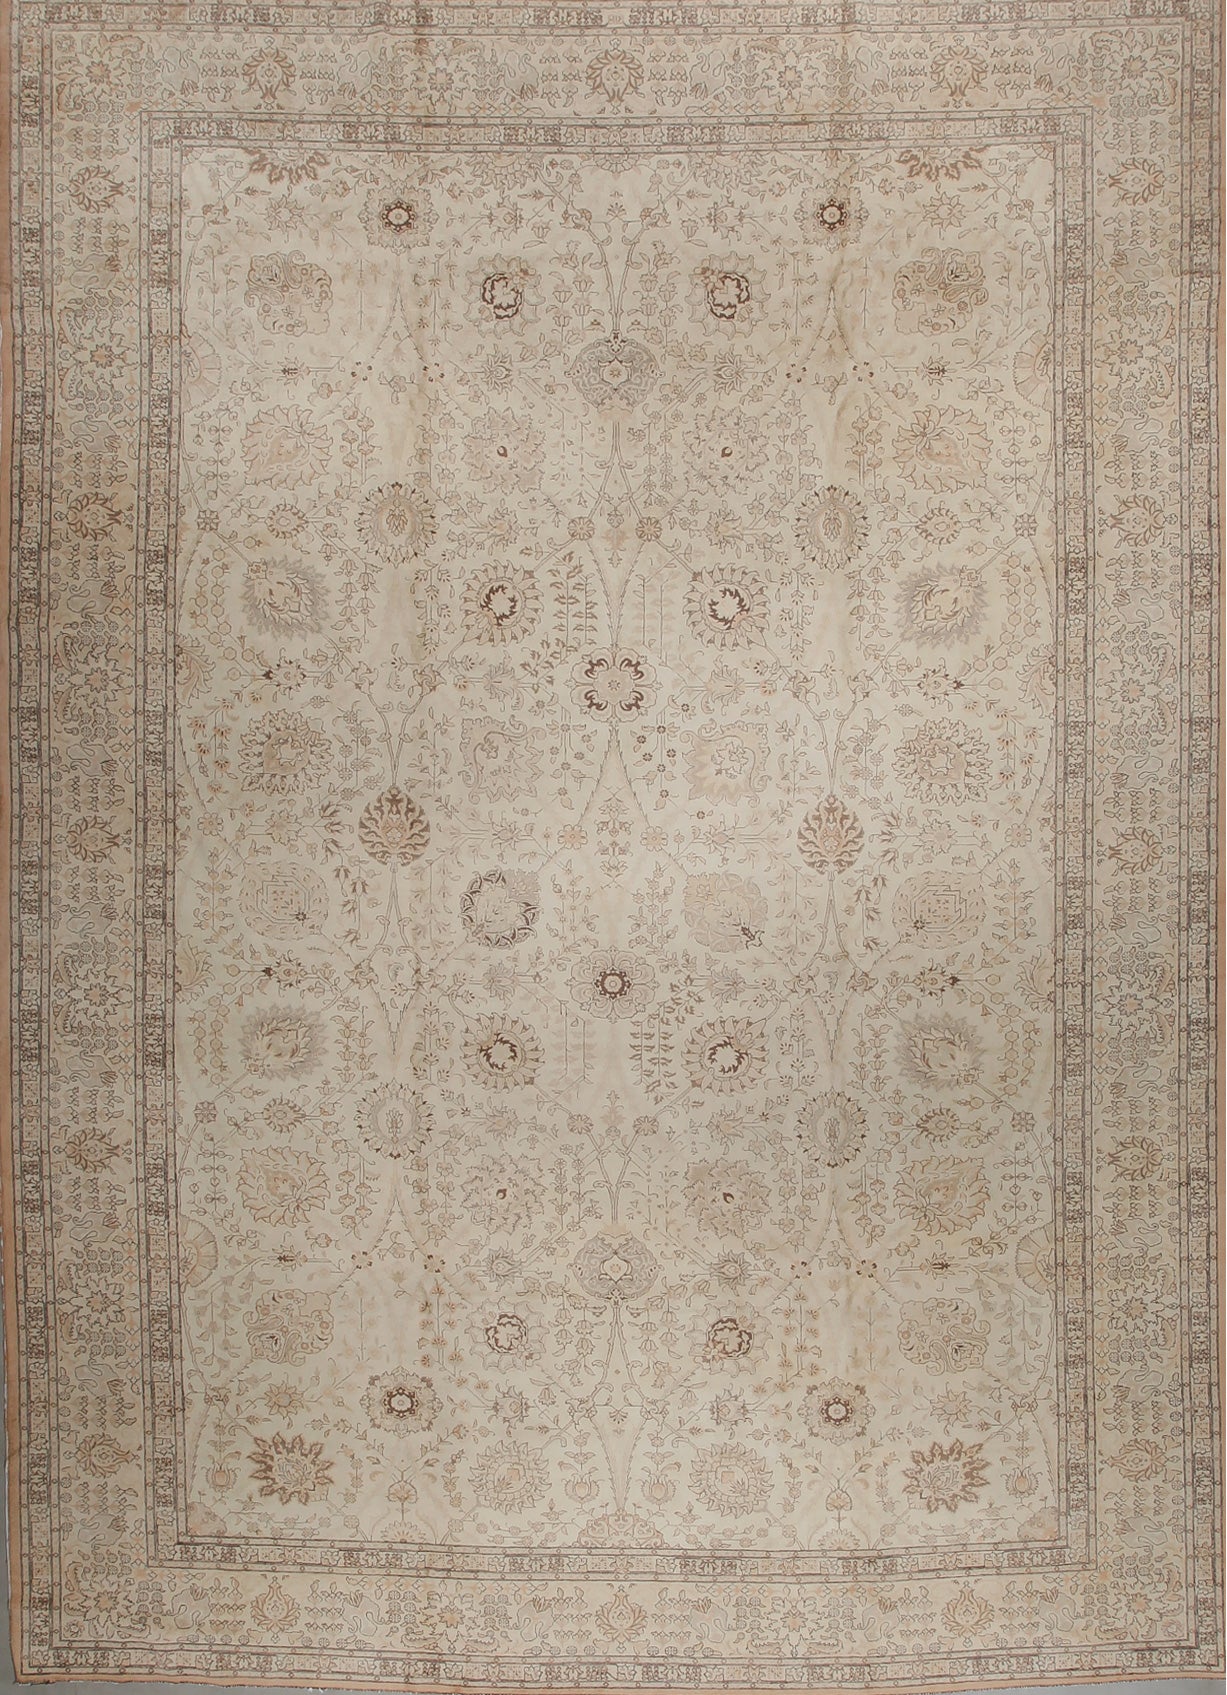 Antique and cultivated rug with a tranquil vibe excellent for your bedroom.